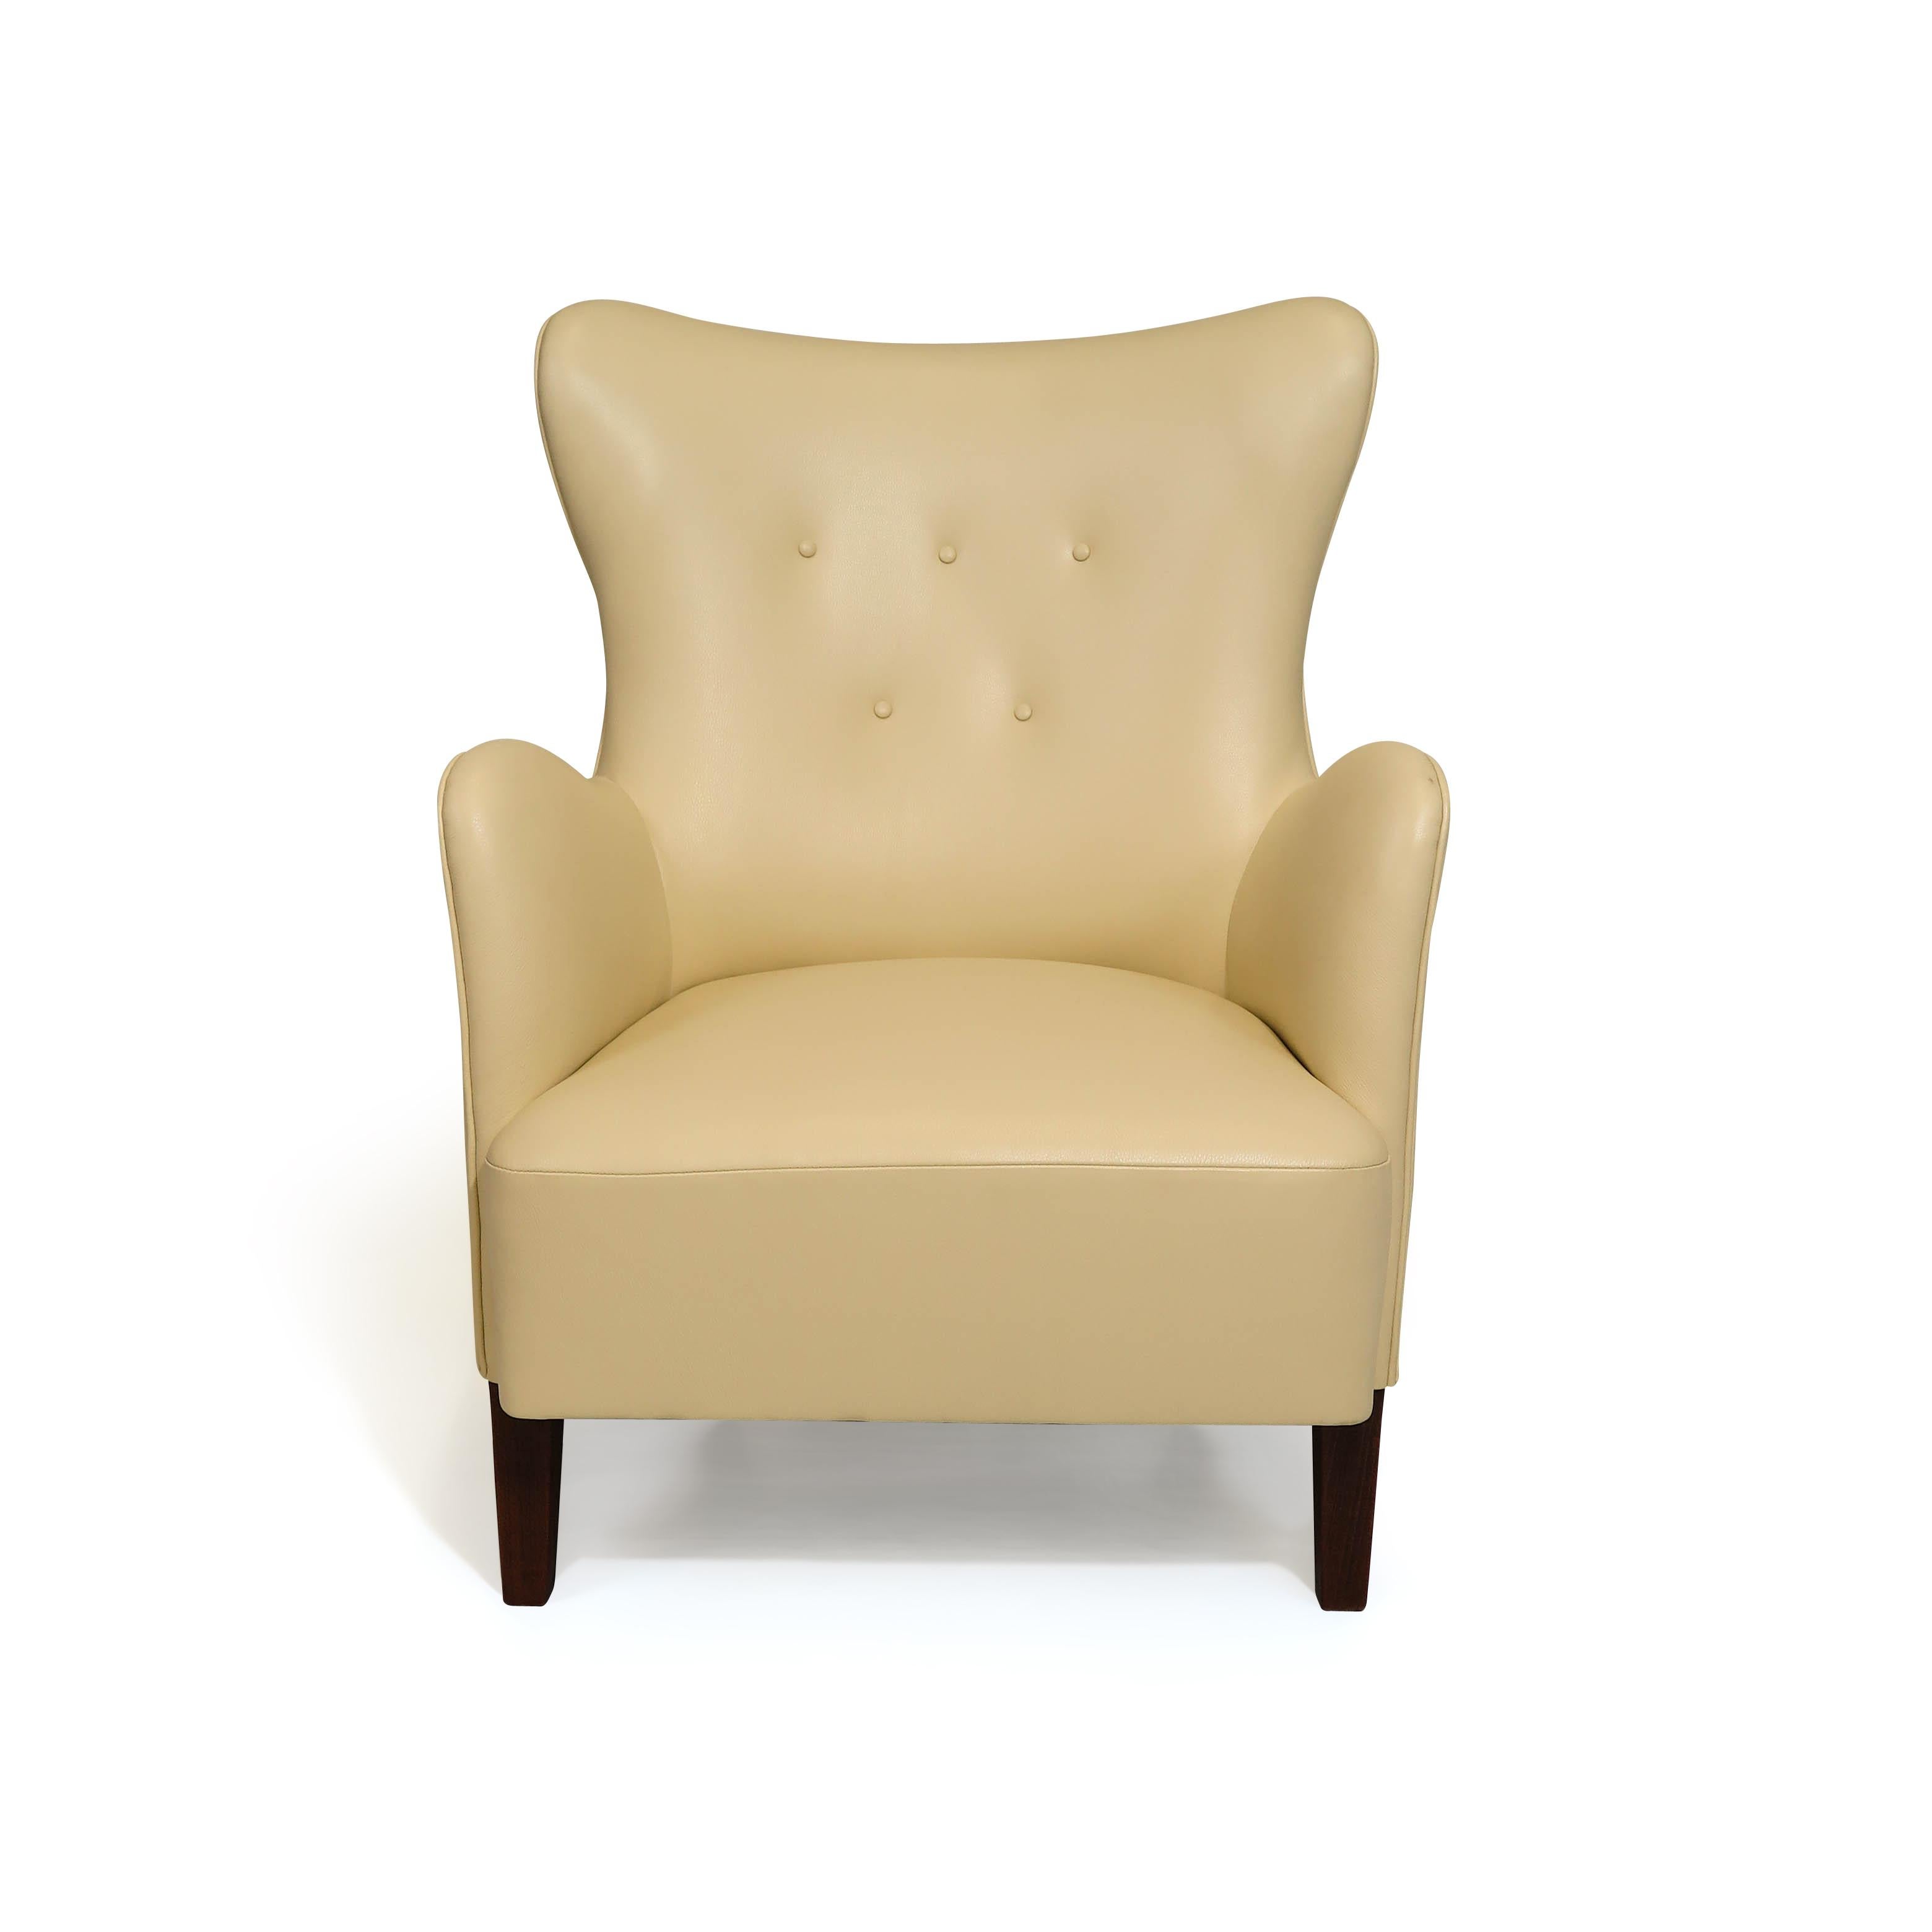 Mid-20th Century Early Peter Hvidt Lounge Chair in Light Yellow Cream Leather